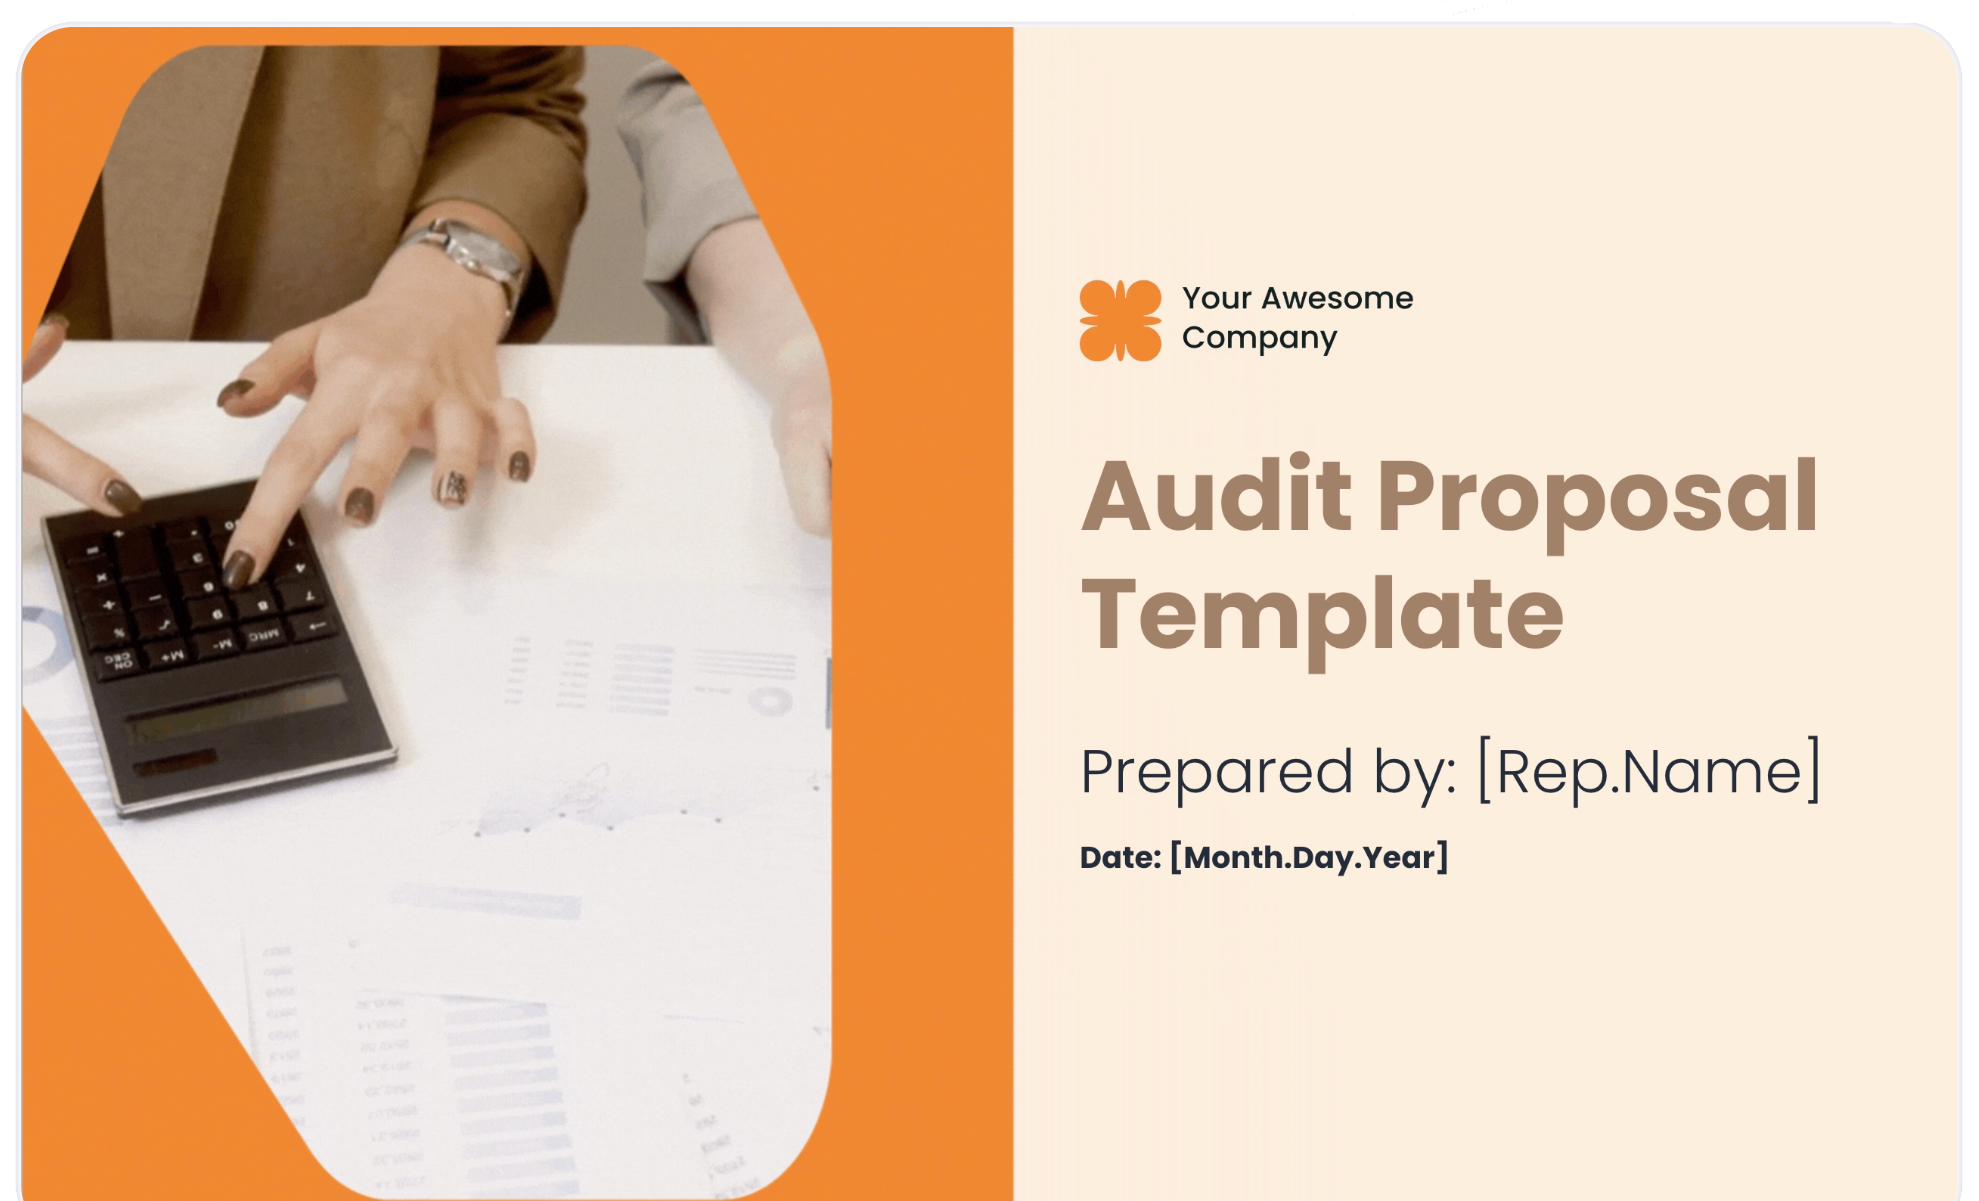 an audit proposal template for your awesome company